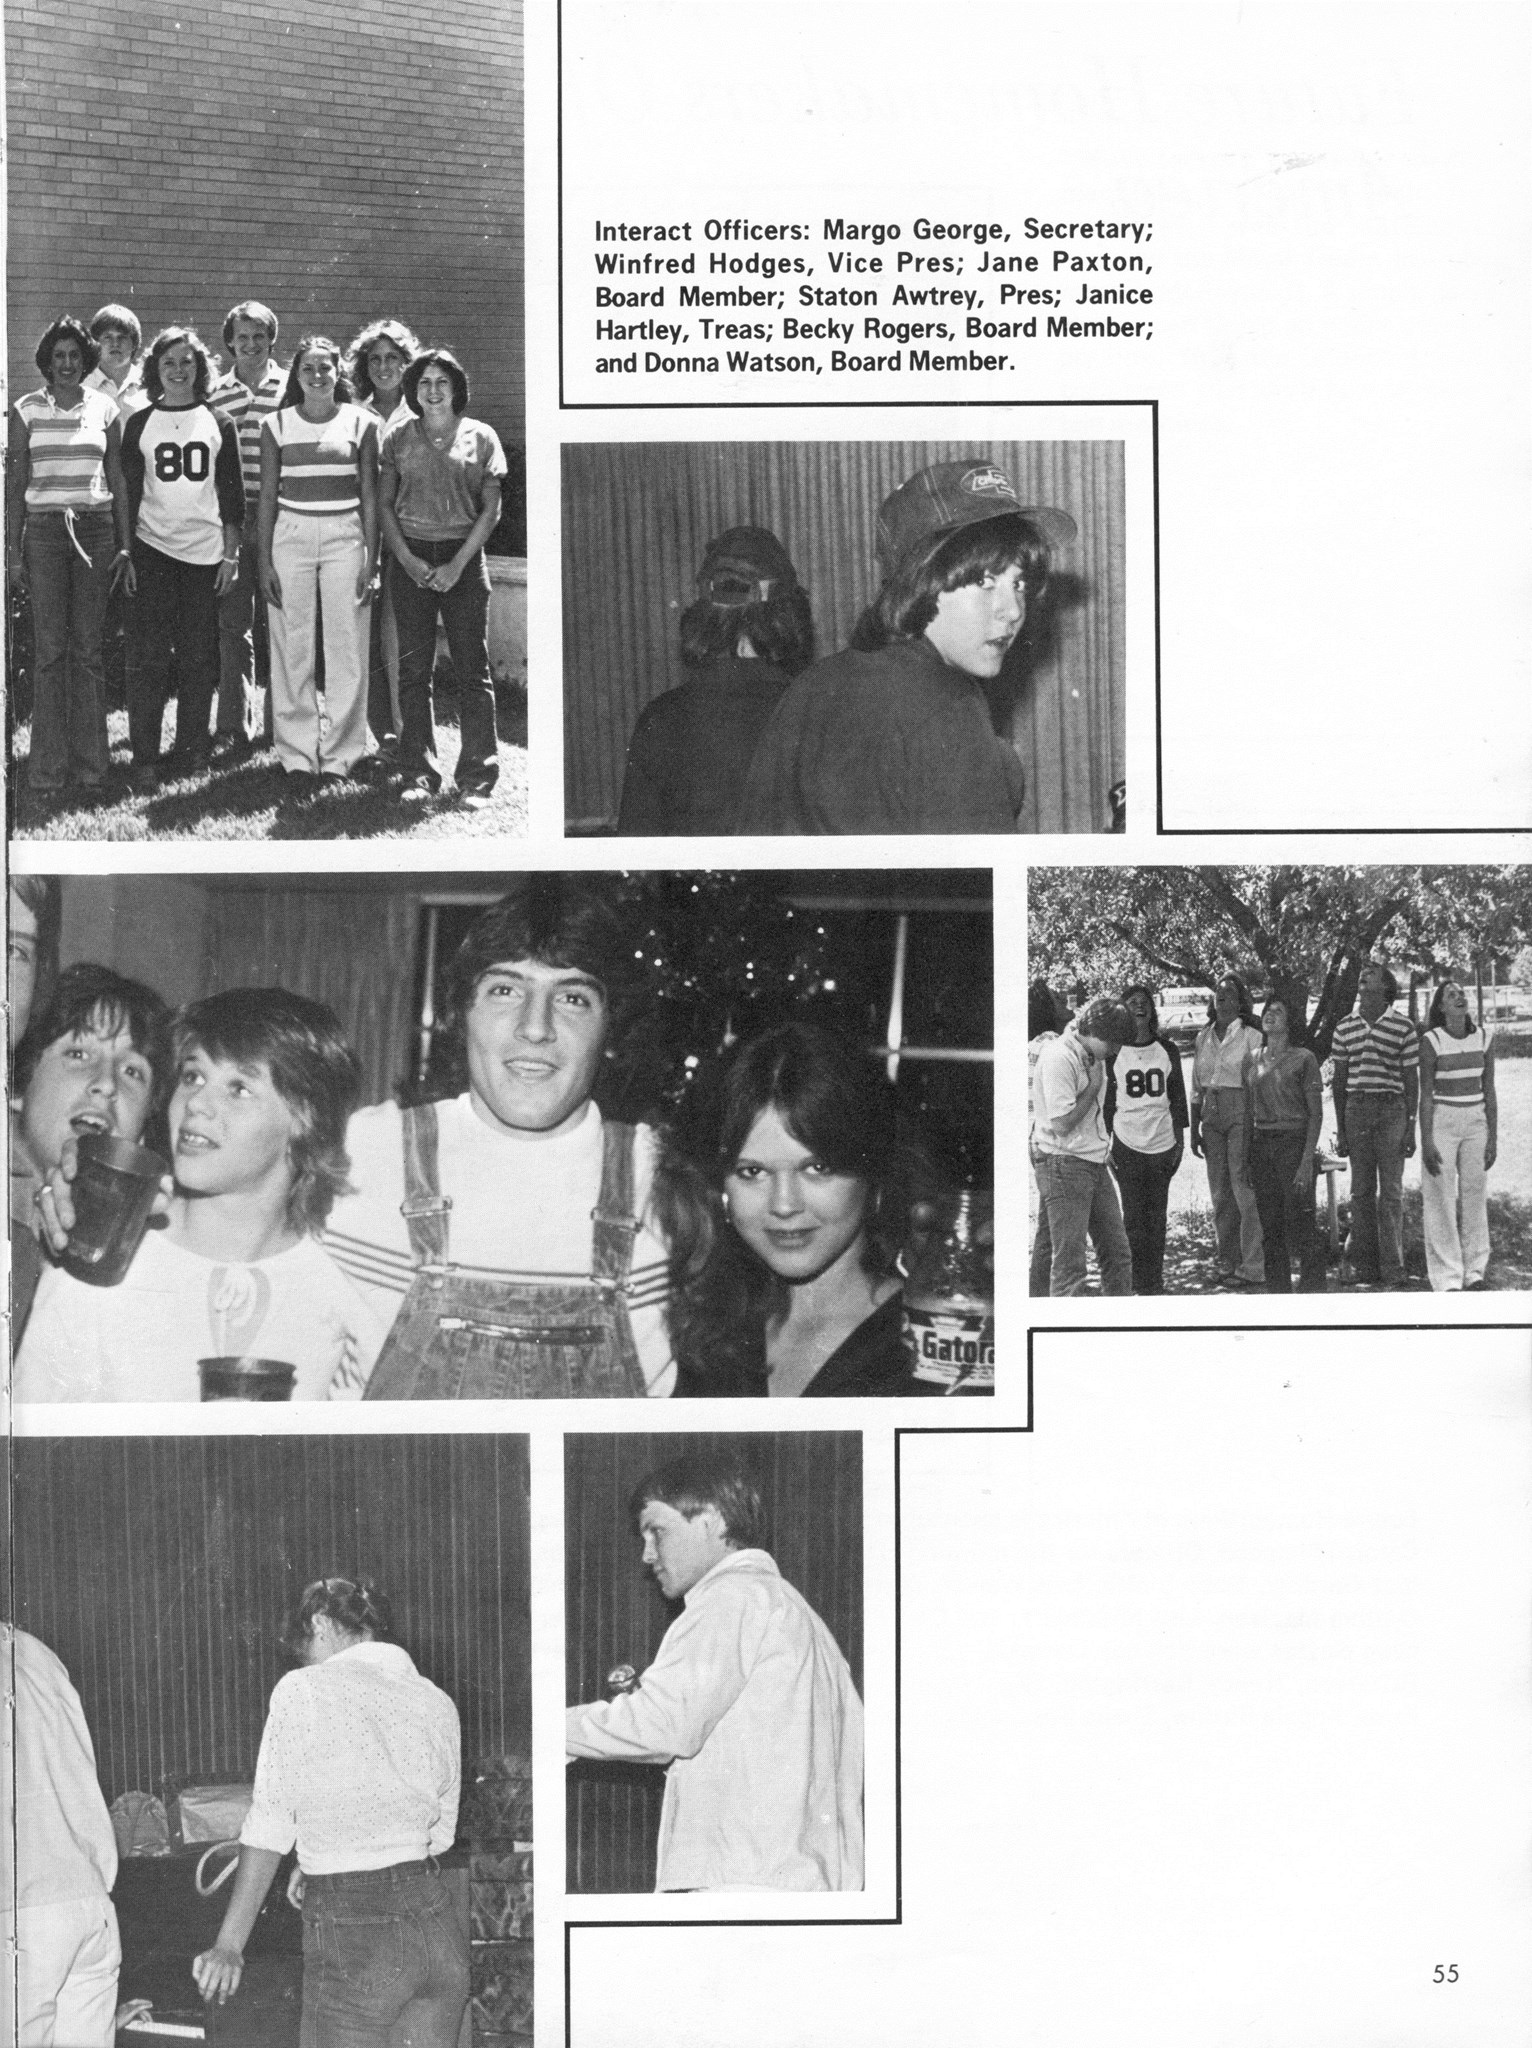 ../../../Images/Large/1979/Arclight-1979-pg0055.jpg